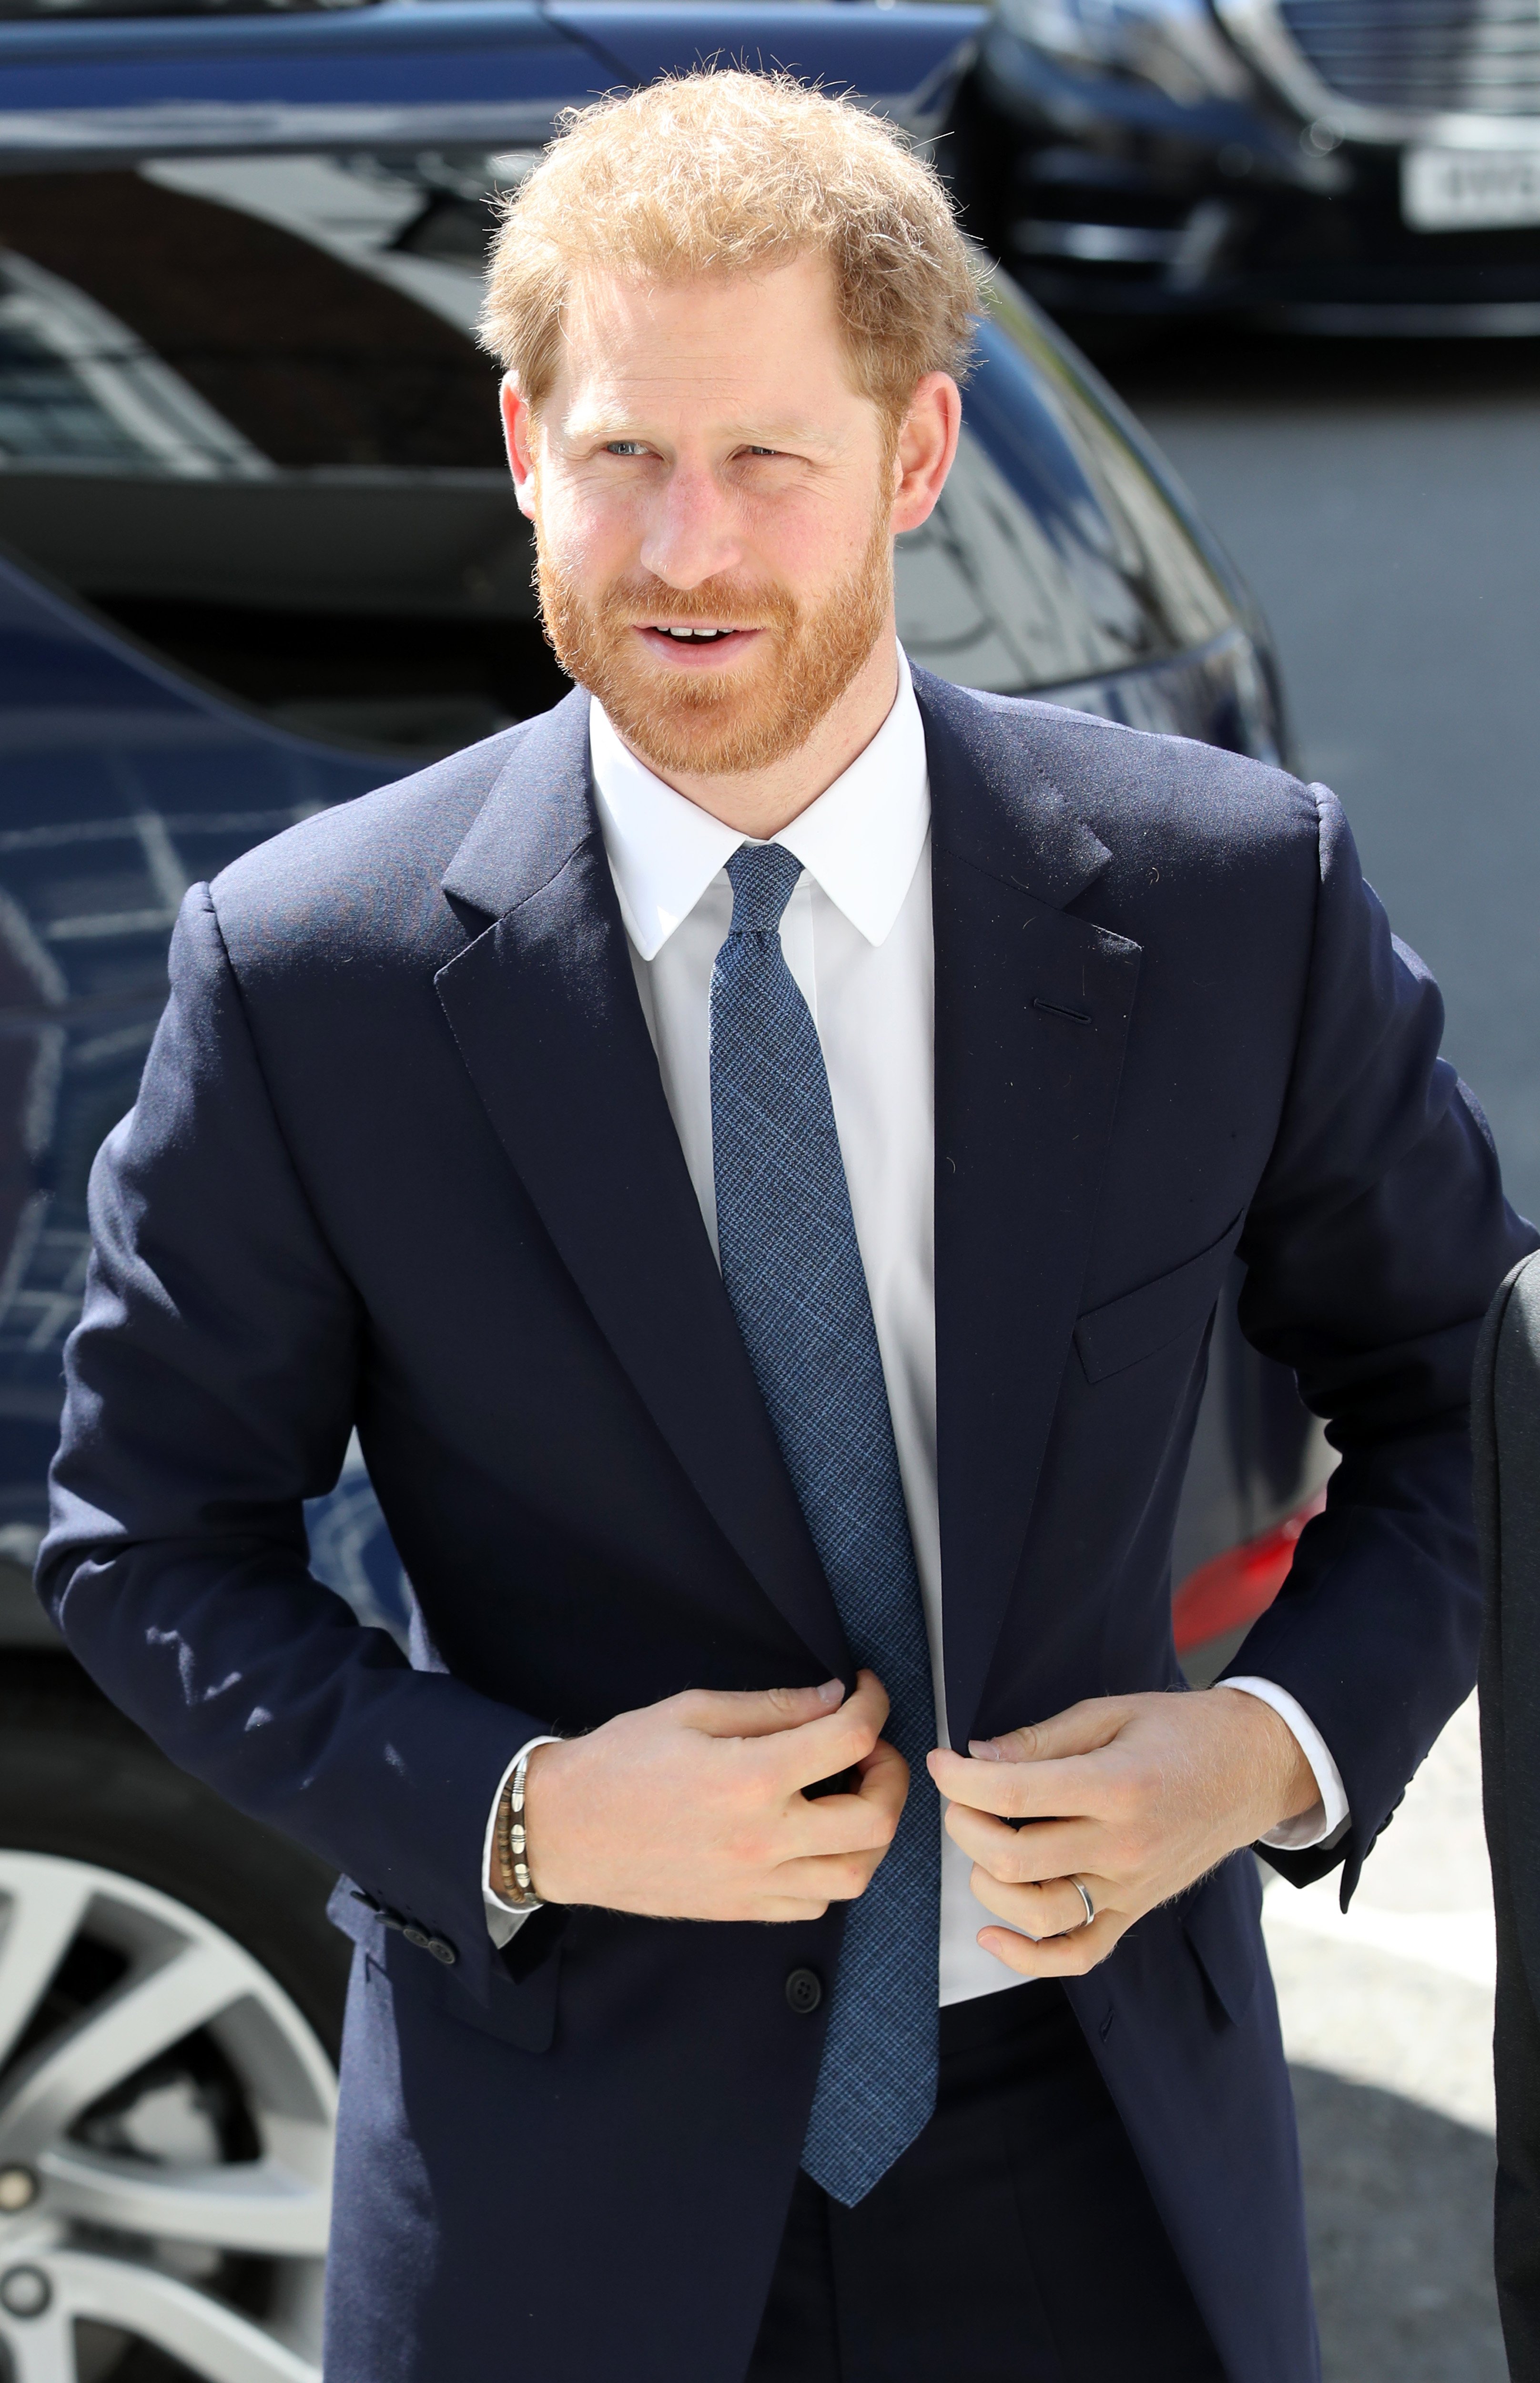 Prince Harry, Duke of Sussex, arrives at Chatham House on June 17, 2019 in London Colney, England.  Source: Getty Images